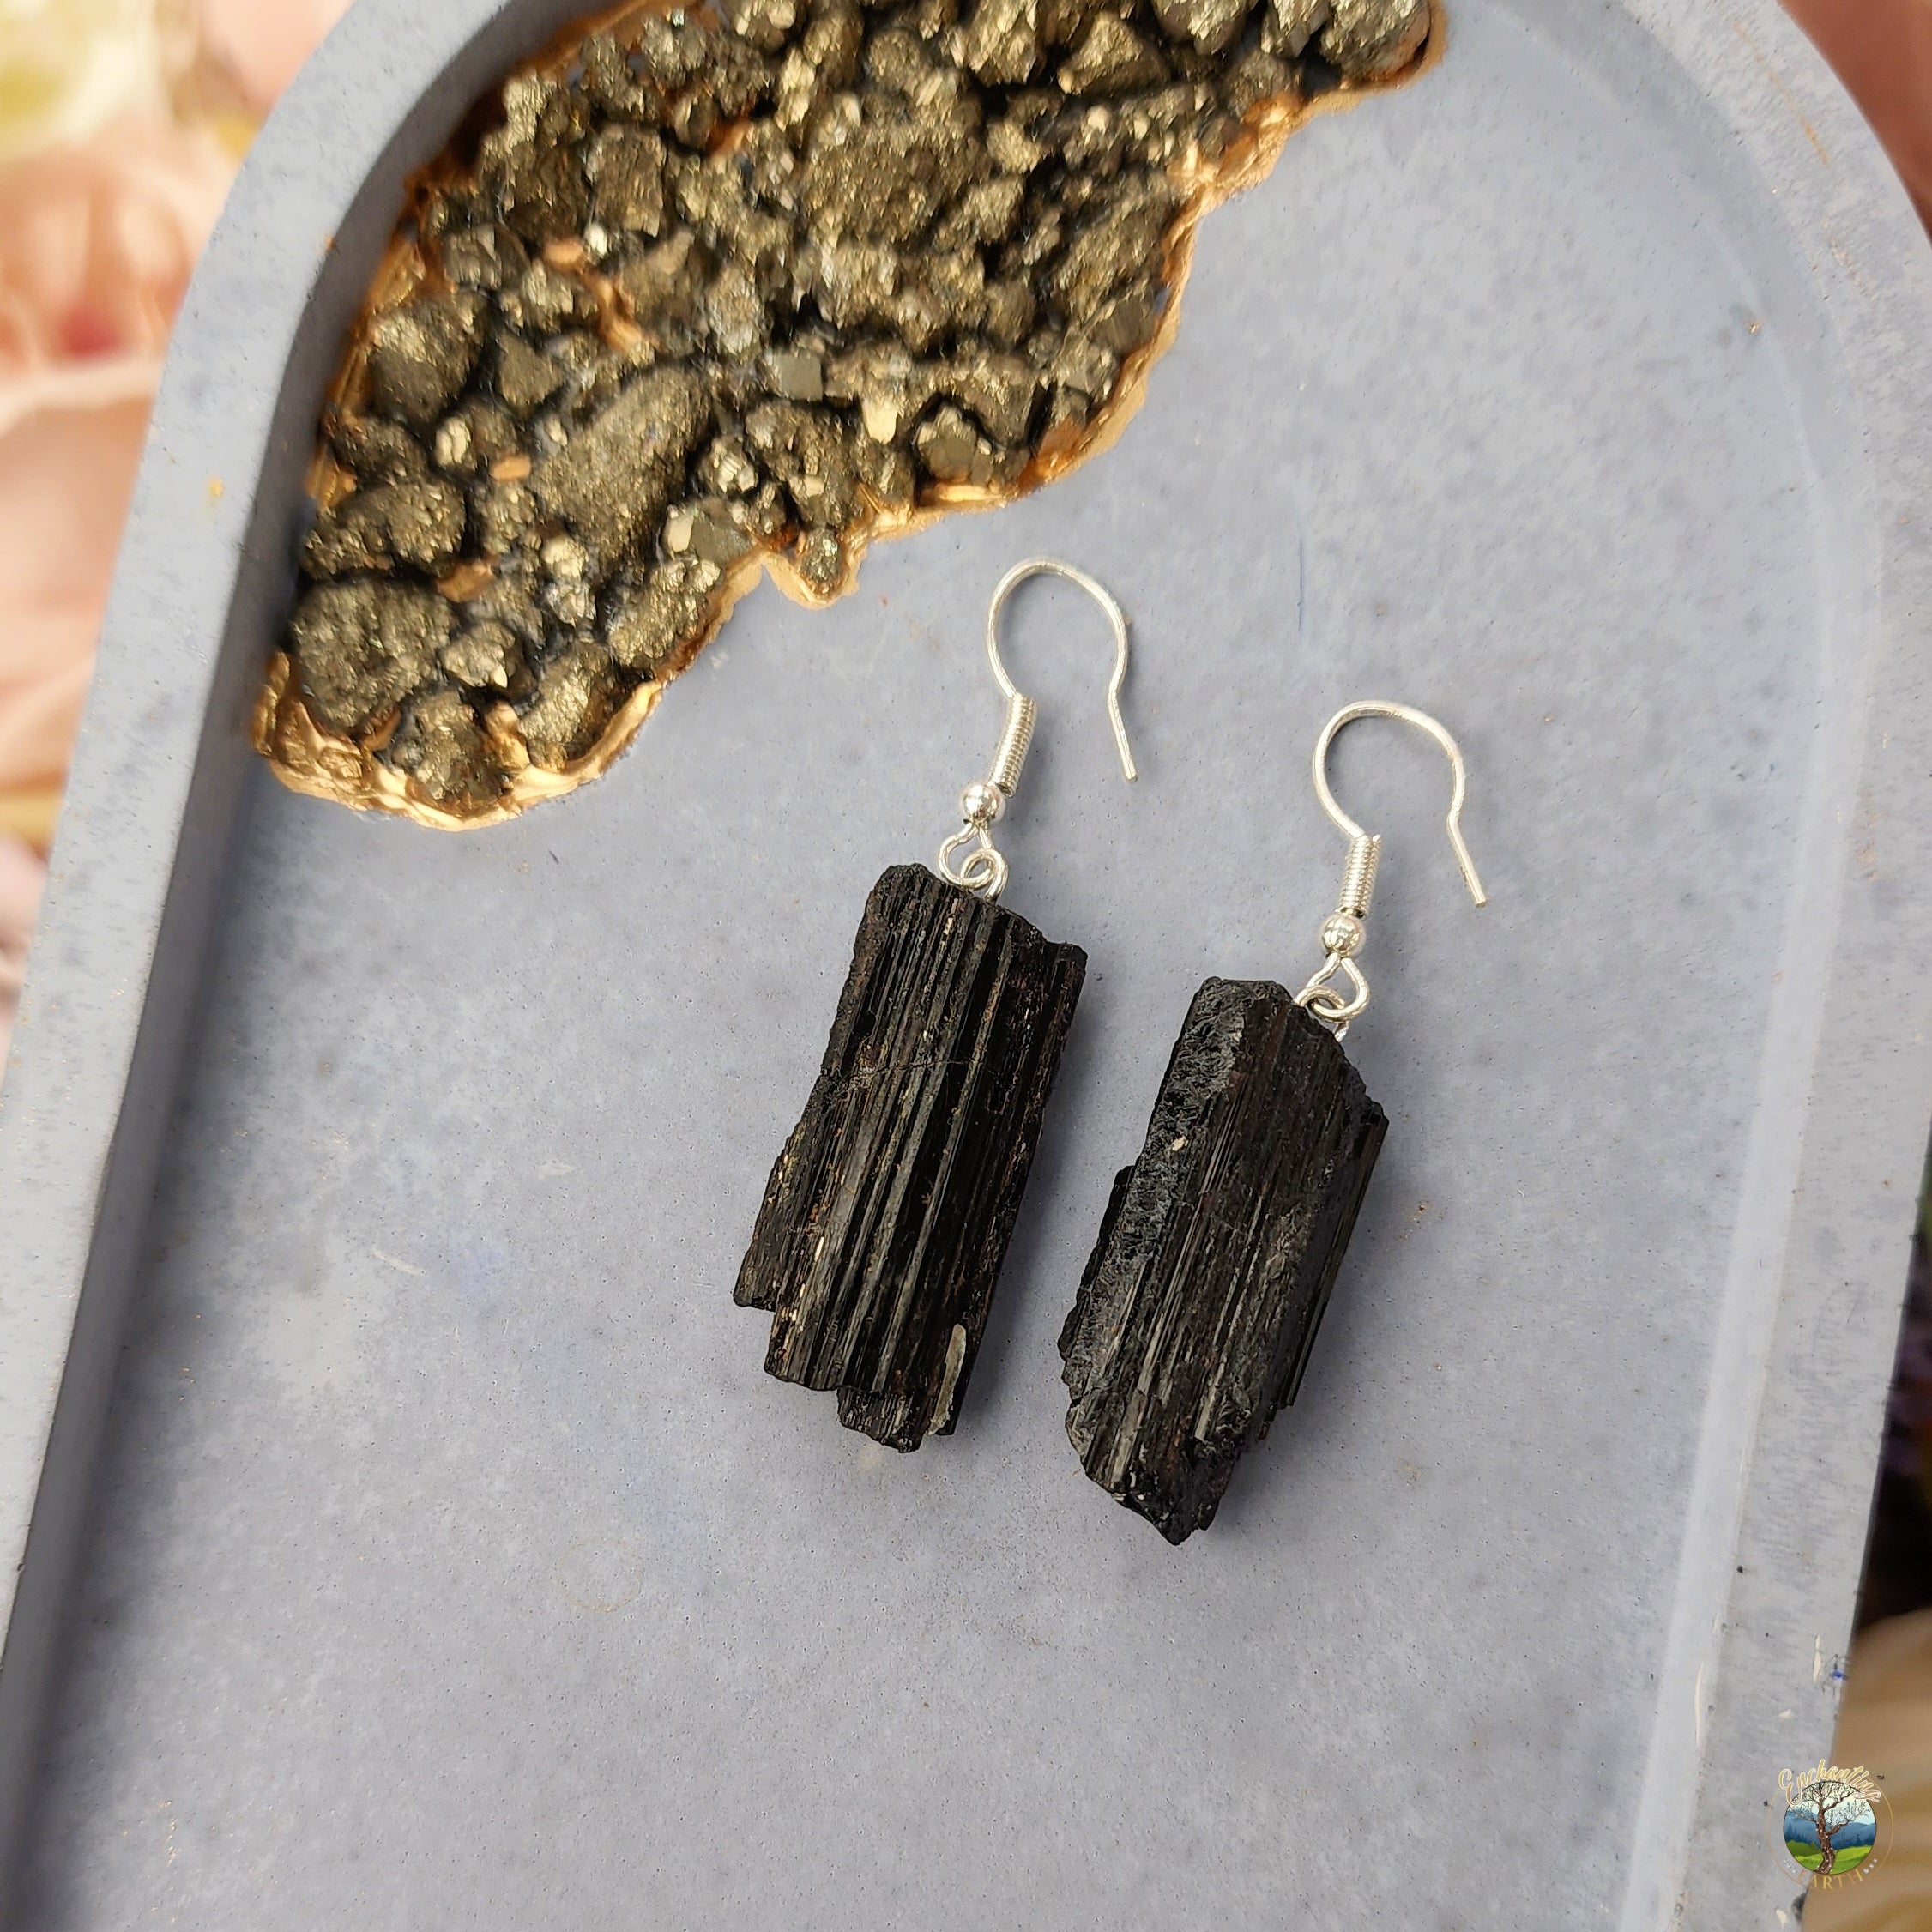 Black Tourmaline Earrings for Protection